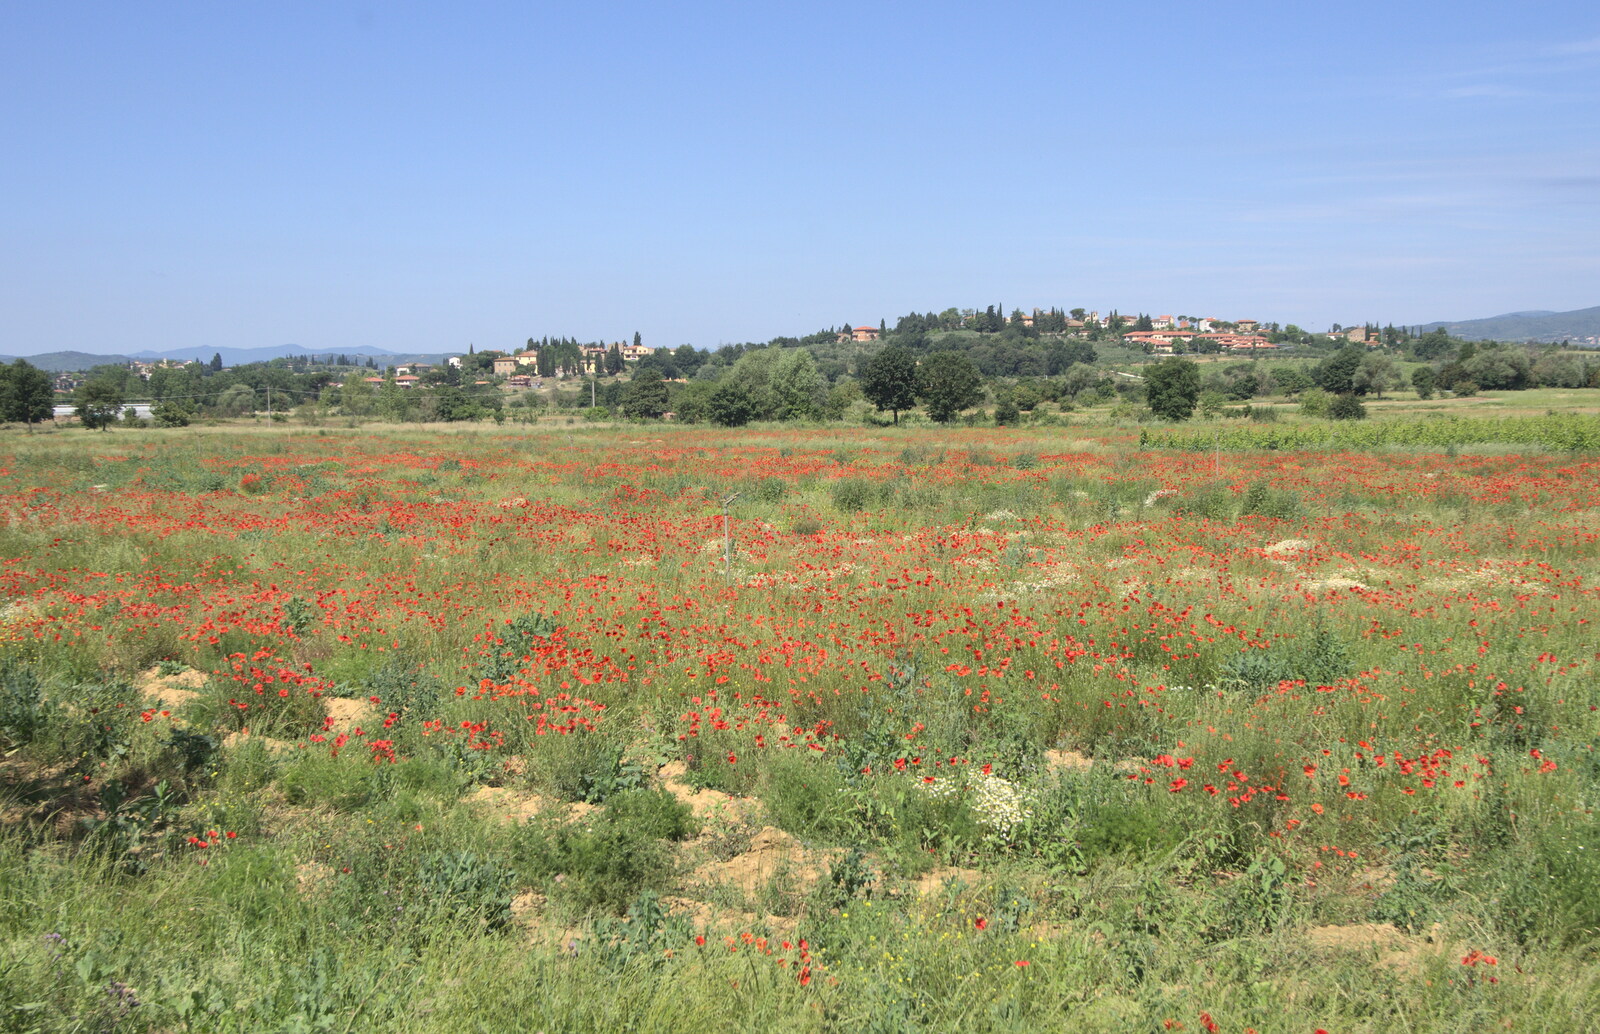 More poppies of Tuscany from La Verna Monastery and the Fireflies of Tuscany, Italy - 14th June 2013